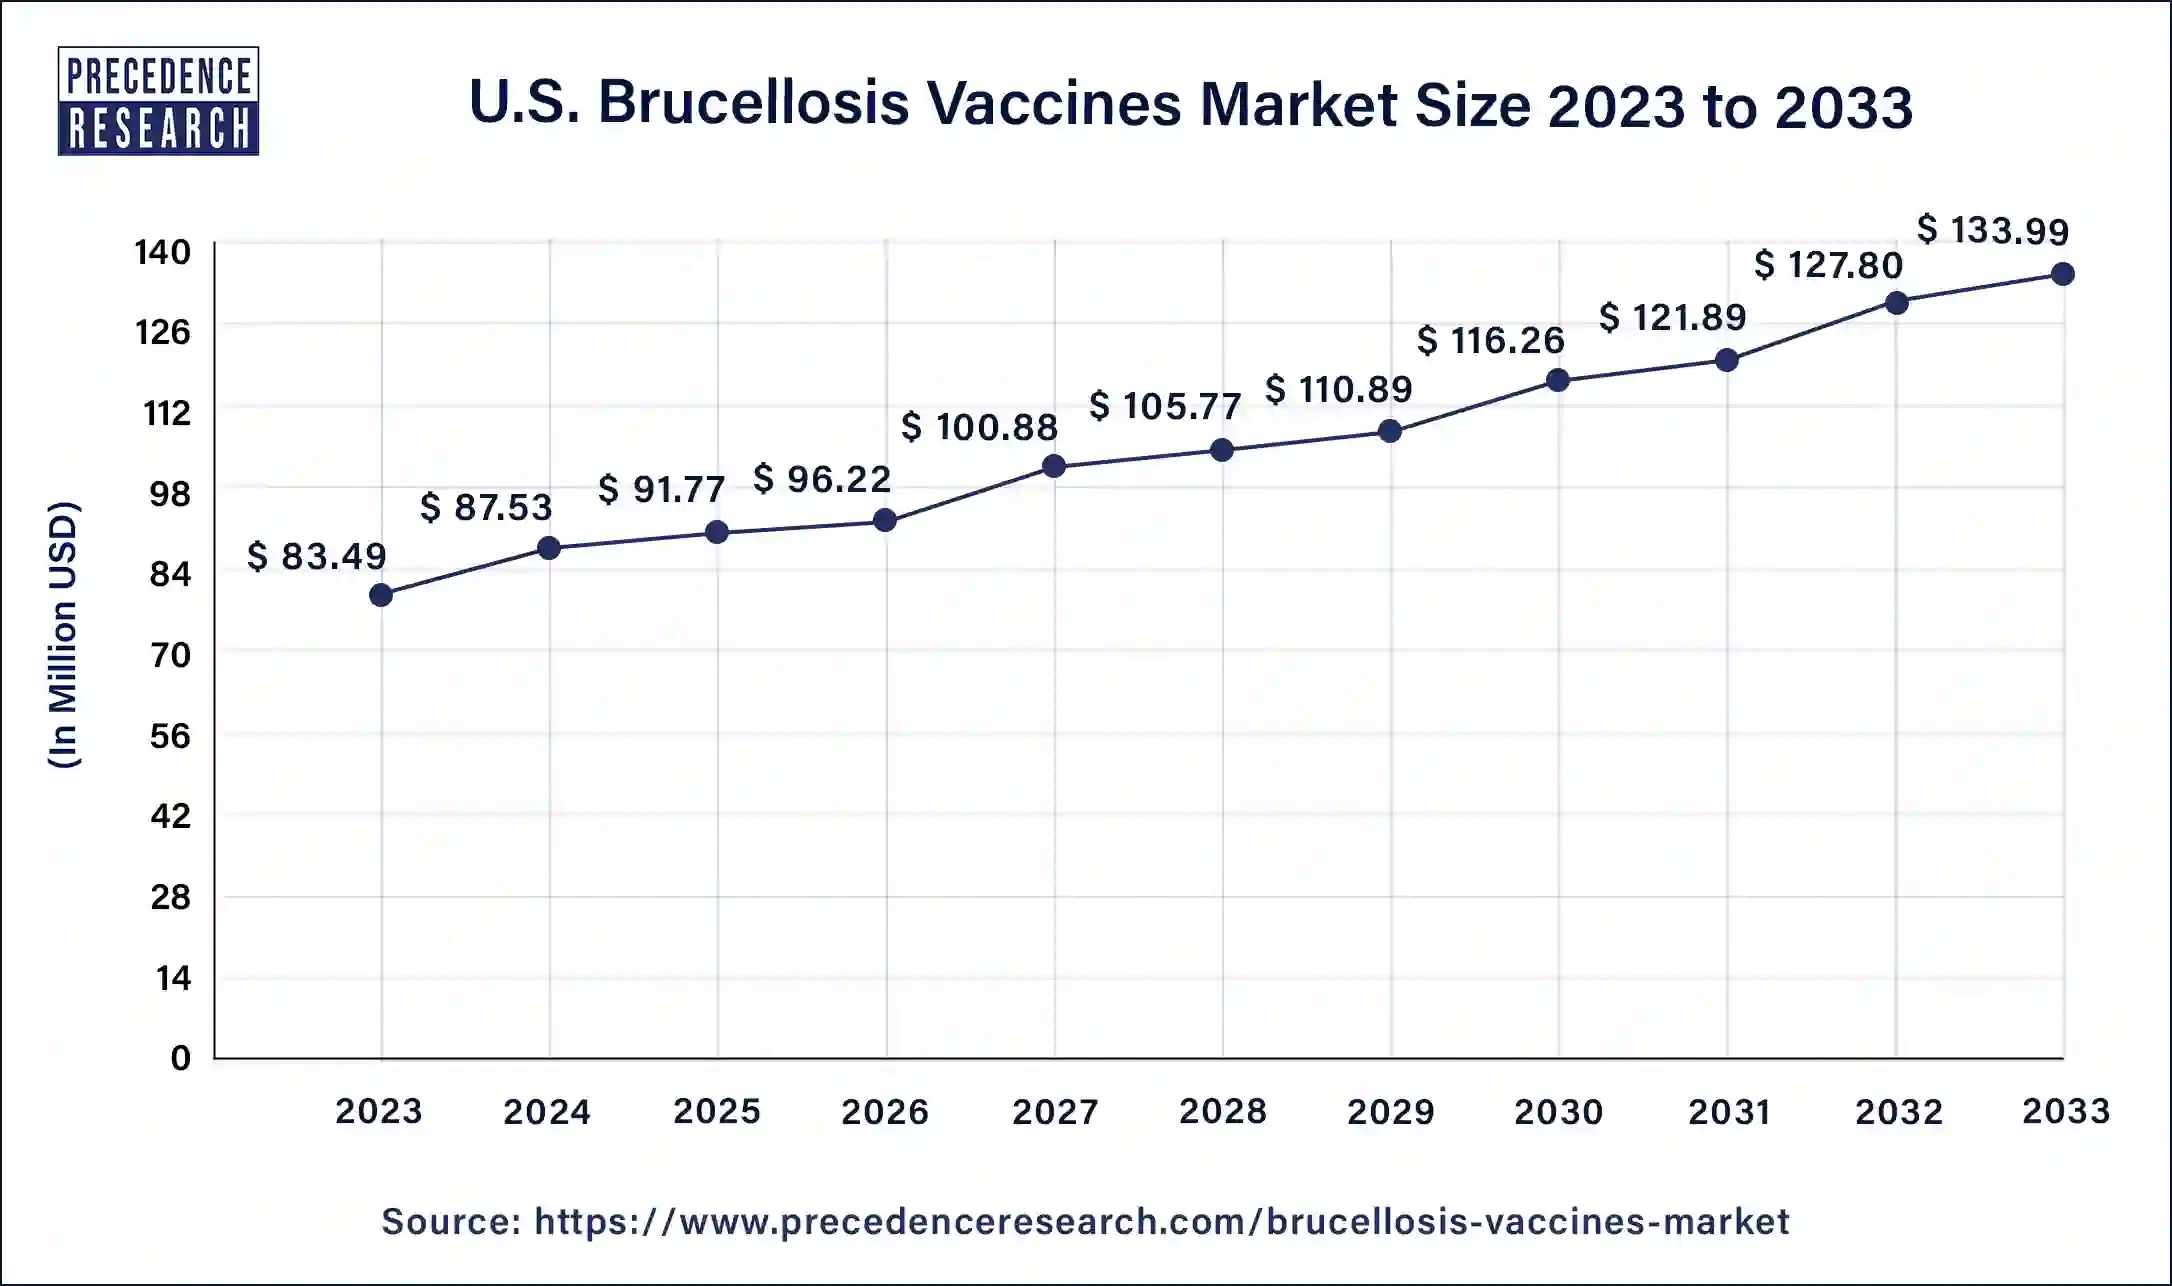 U.S. Brucellosis Vaccines Market Size 2024 to 2033